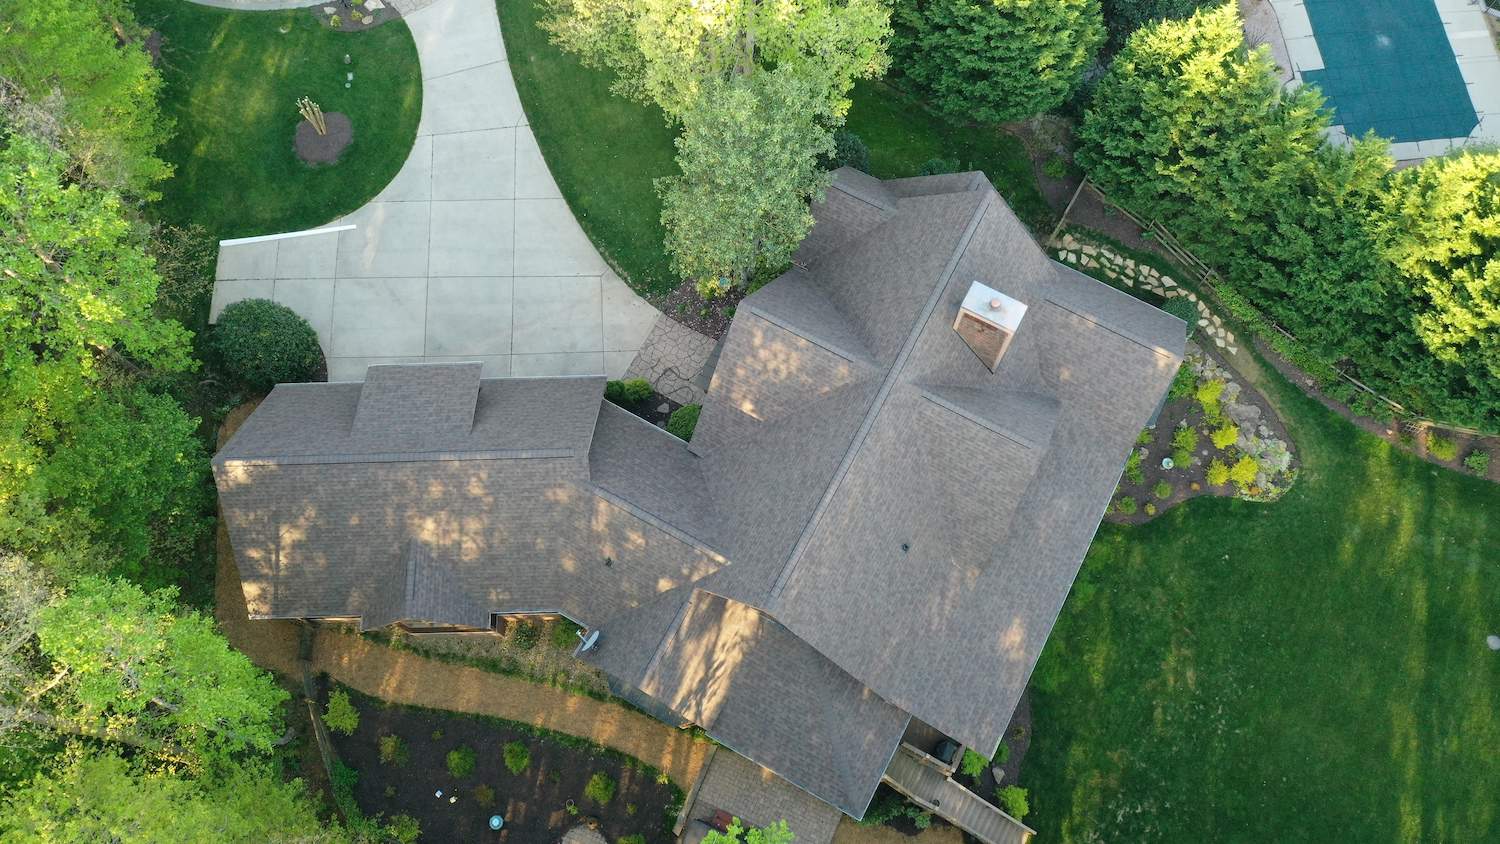 http://top%20aerial%20view%20of%20trudefinition%20duration%20teak%20shingles%20on%20residential%20home%20and%20driveway